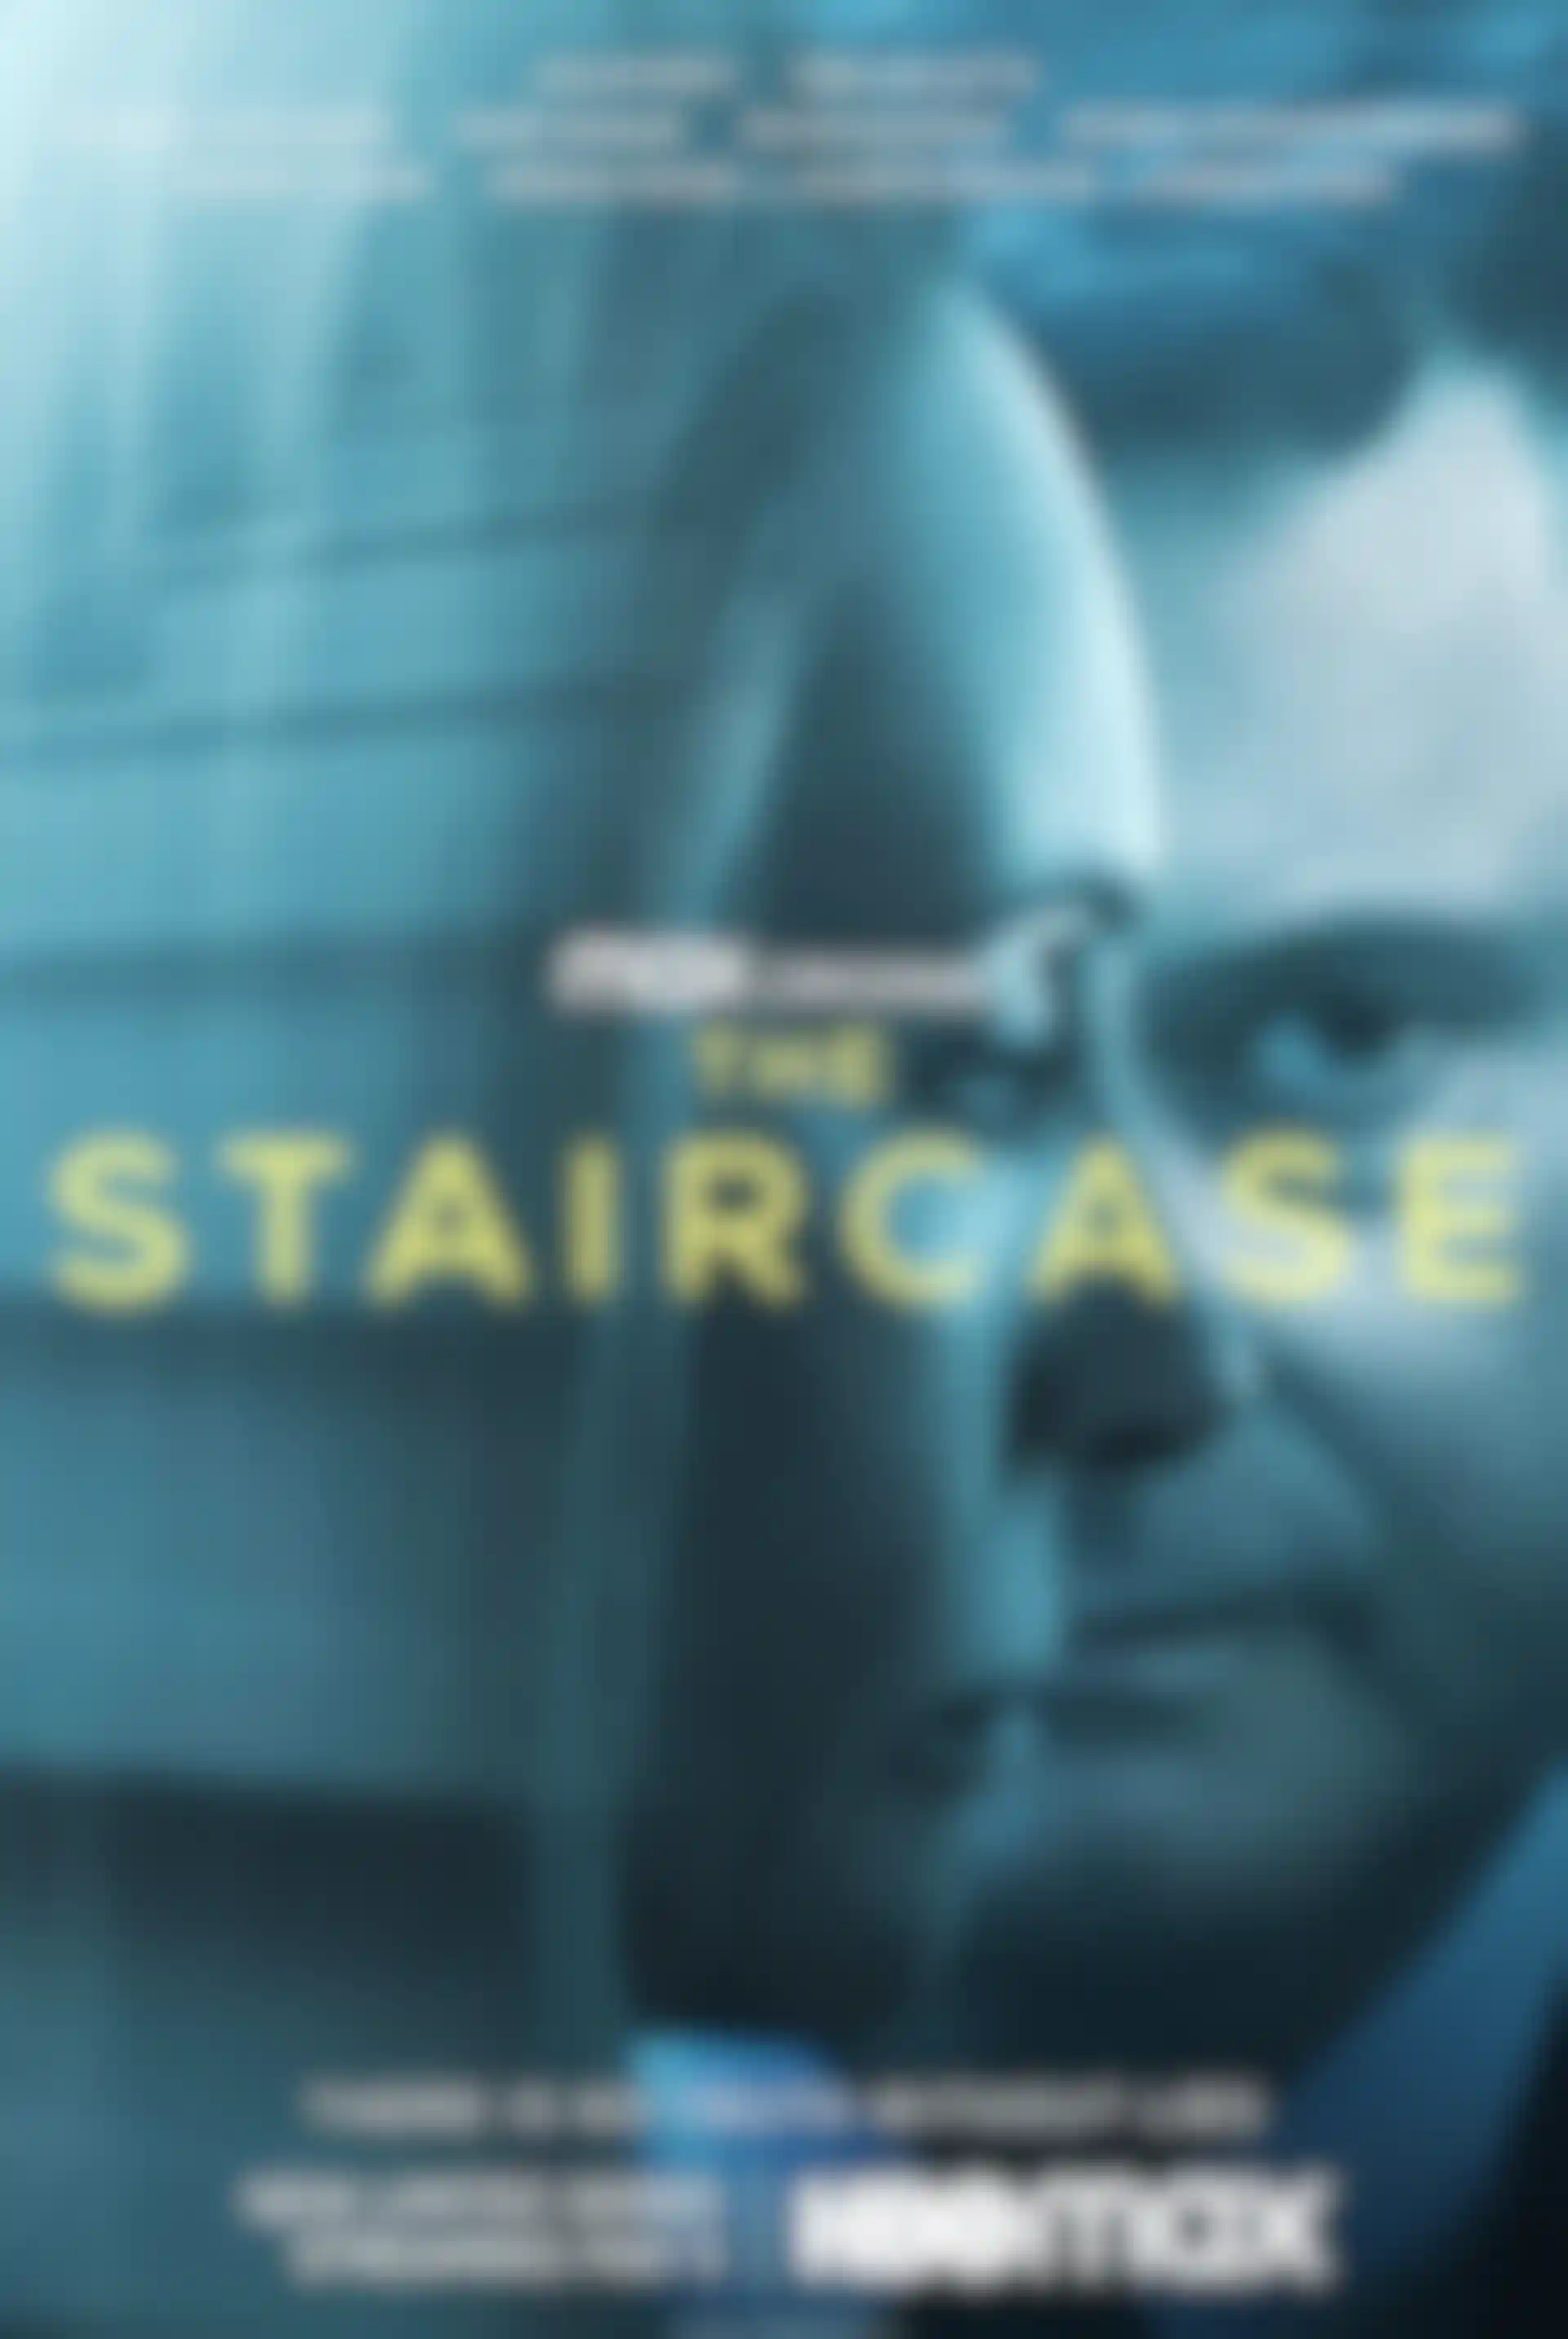 The Staircase - International versioning and dubbing